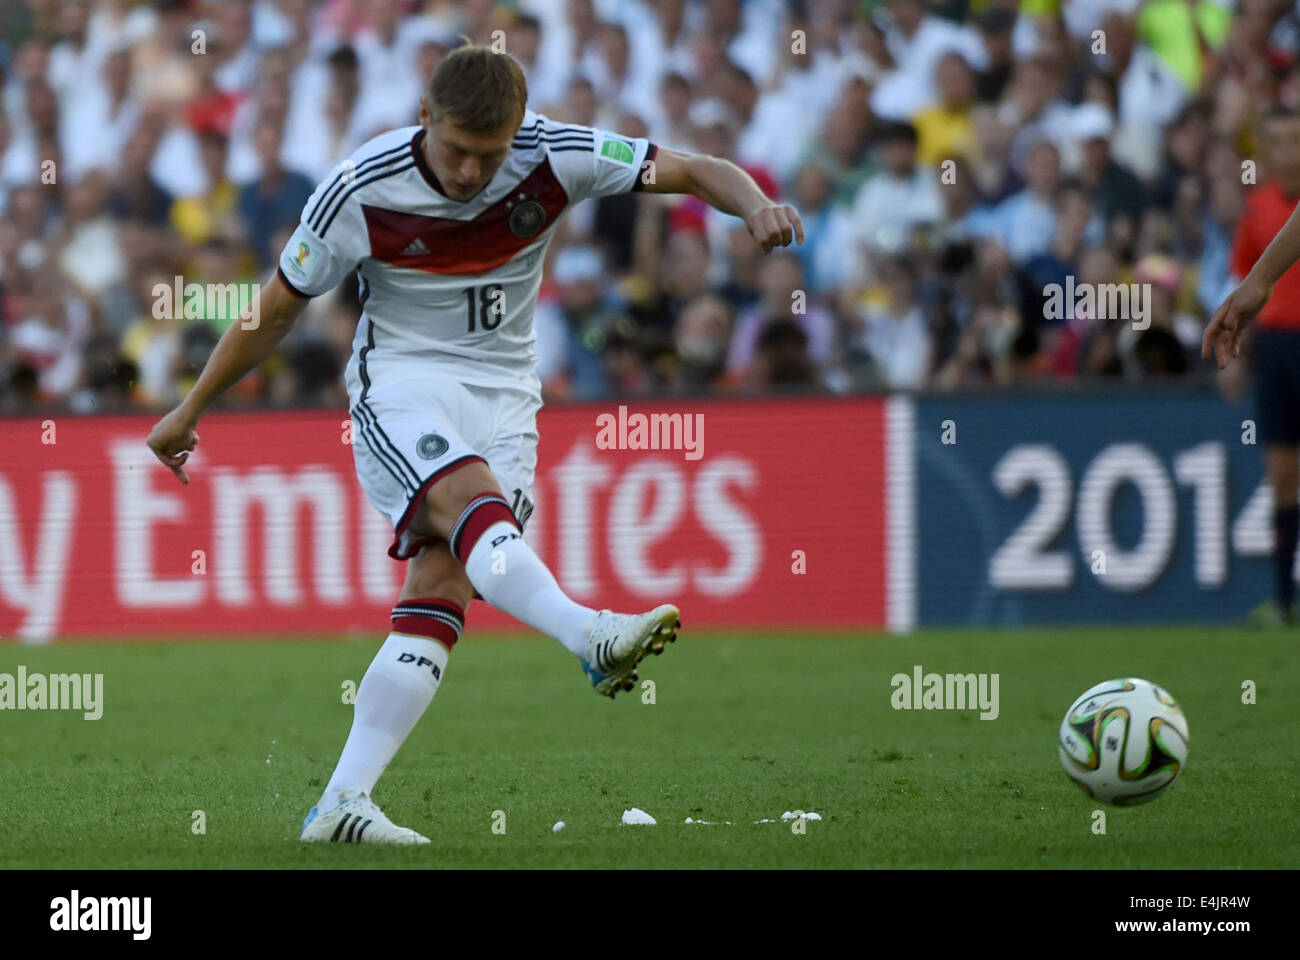 Rio De Janeiro, Brazil. 13th July, 2014. Germany's Toni Kroos makes a free kick during the final match between Germany and Argentina of 2014 FIFA World Cup at the Estadio do Maracana Stadium in Rio de Janeiro, Brazil, on July 13, 2014. Credit:  Guo Yong/Xinhua/Alamy Live News Stock Photo